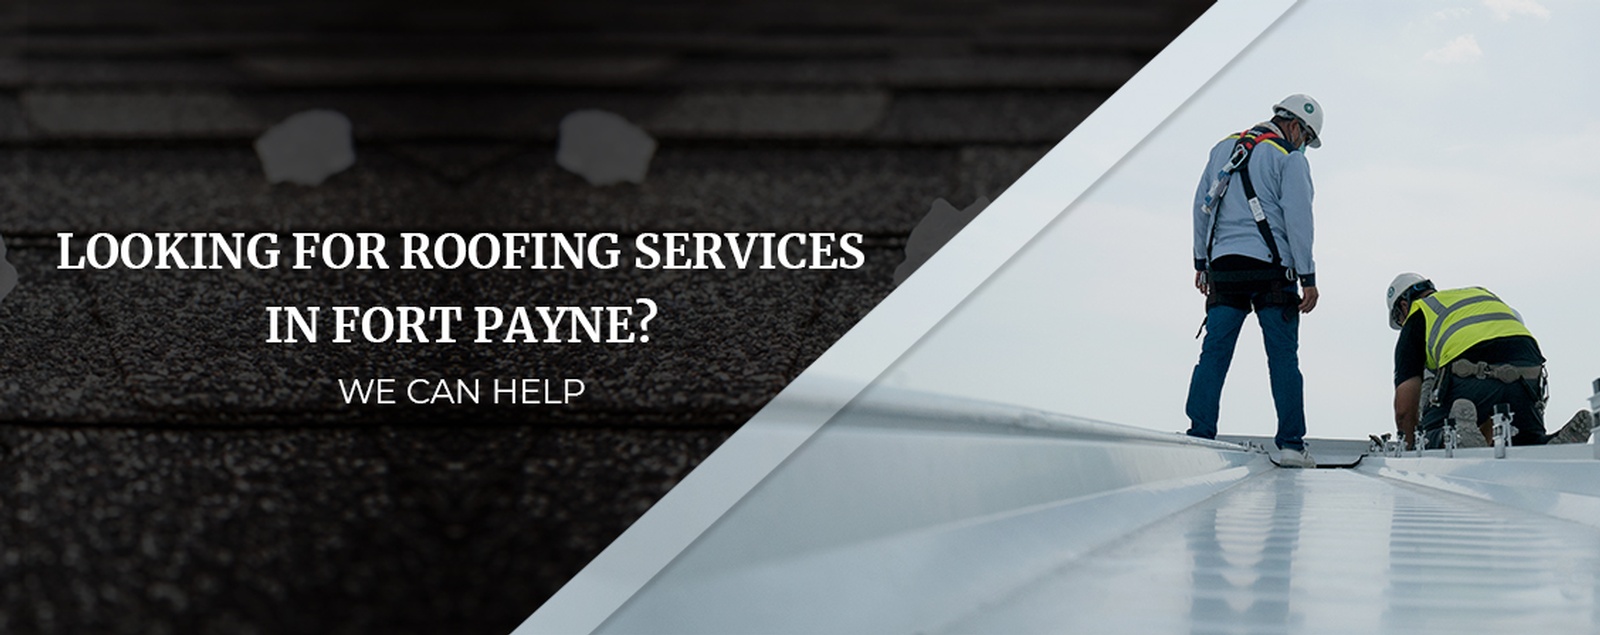 Looking For Roofing Services In Fort Payne We Can Help